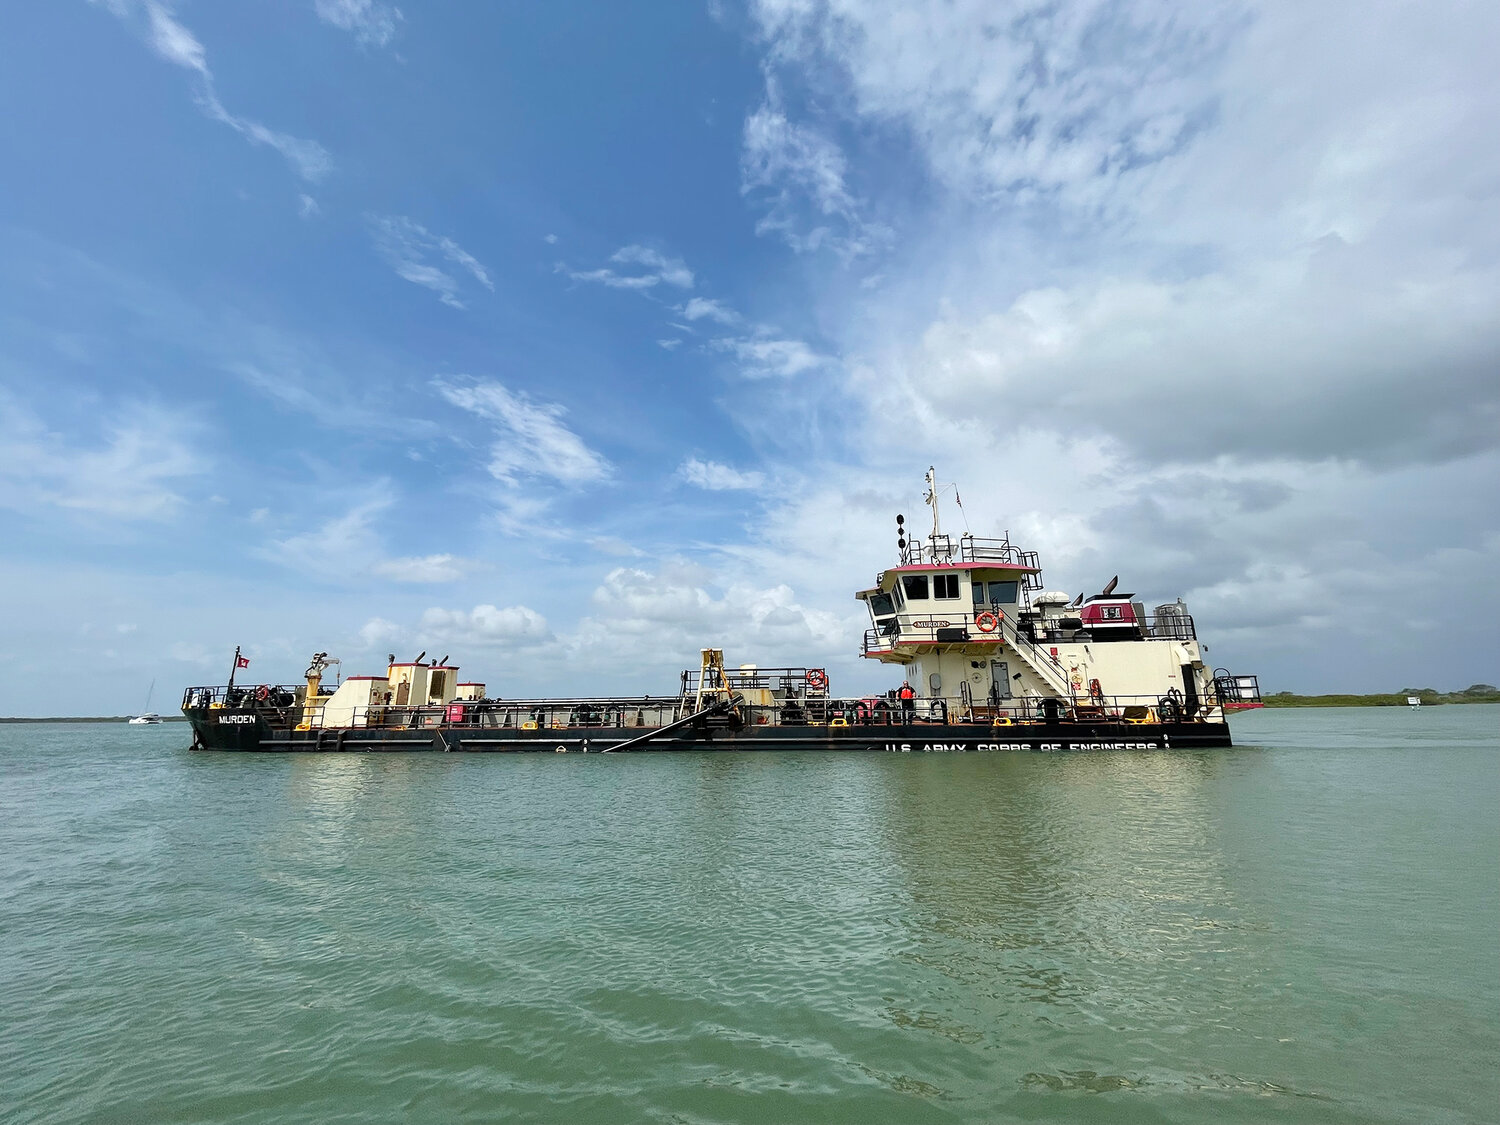 U.S. Army Corps of Engineers, Jacksonville District, will begin maintenance dredging of sections of the Okeechobee Waterway and Intracoastal Waterway in the vicinity of St. Lucie Inlet in January.